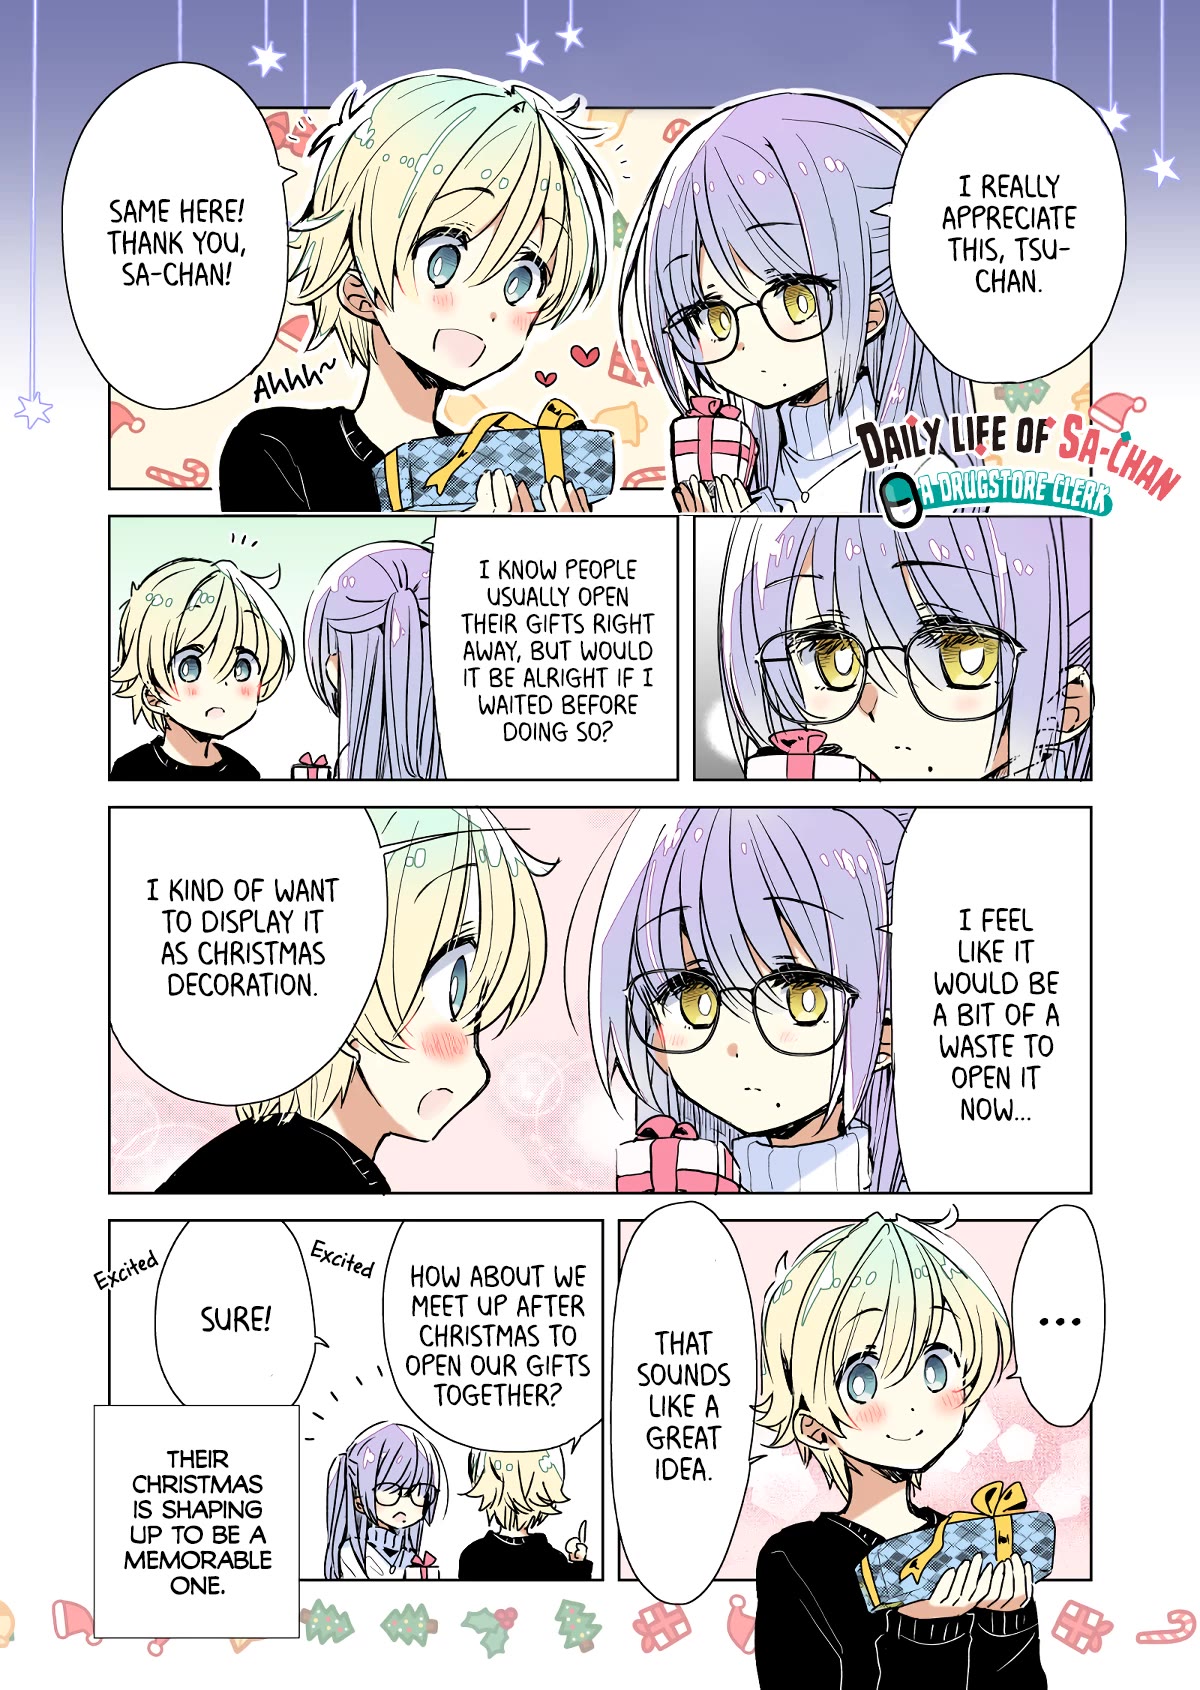 Daily Life Of Sa-Chan, A Drugstore Clerk - chapter 16.6 - #1